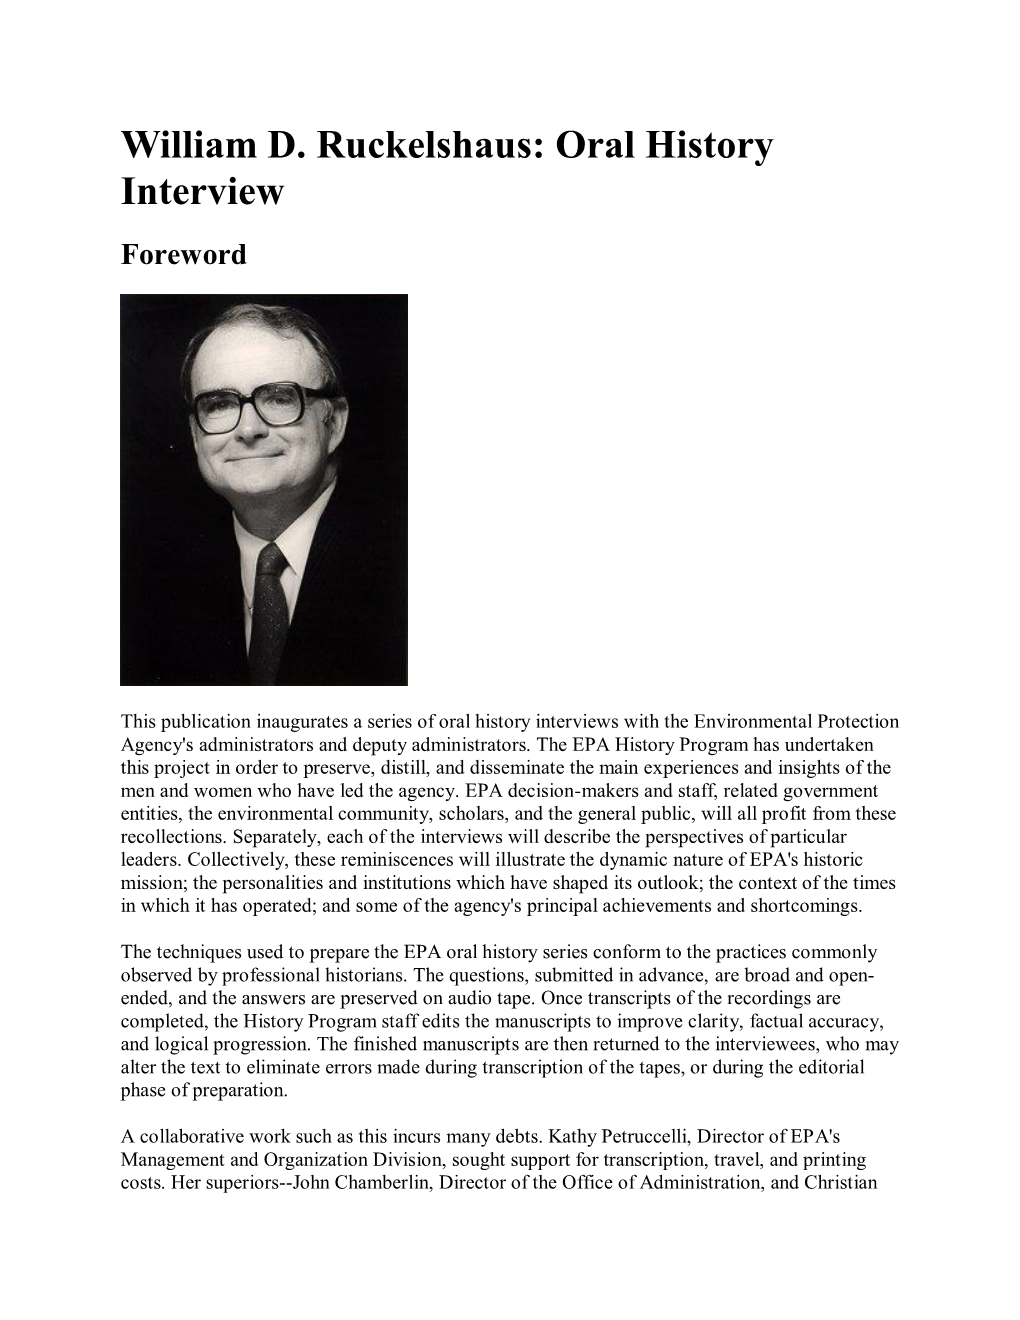 William D. Ruckelshaus: Oral History Interview Foreword